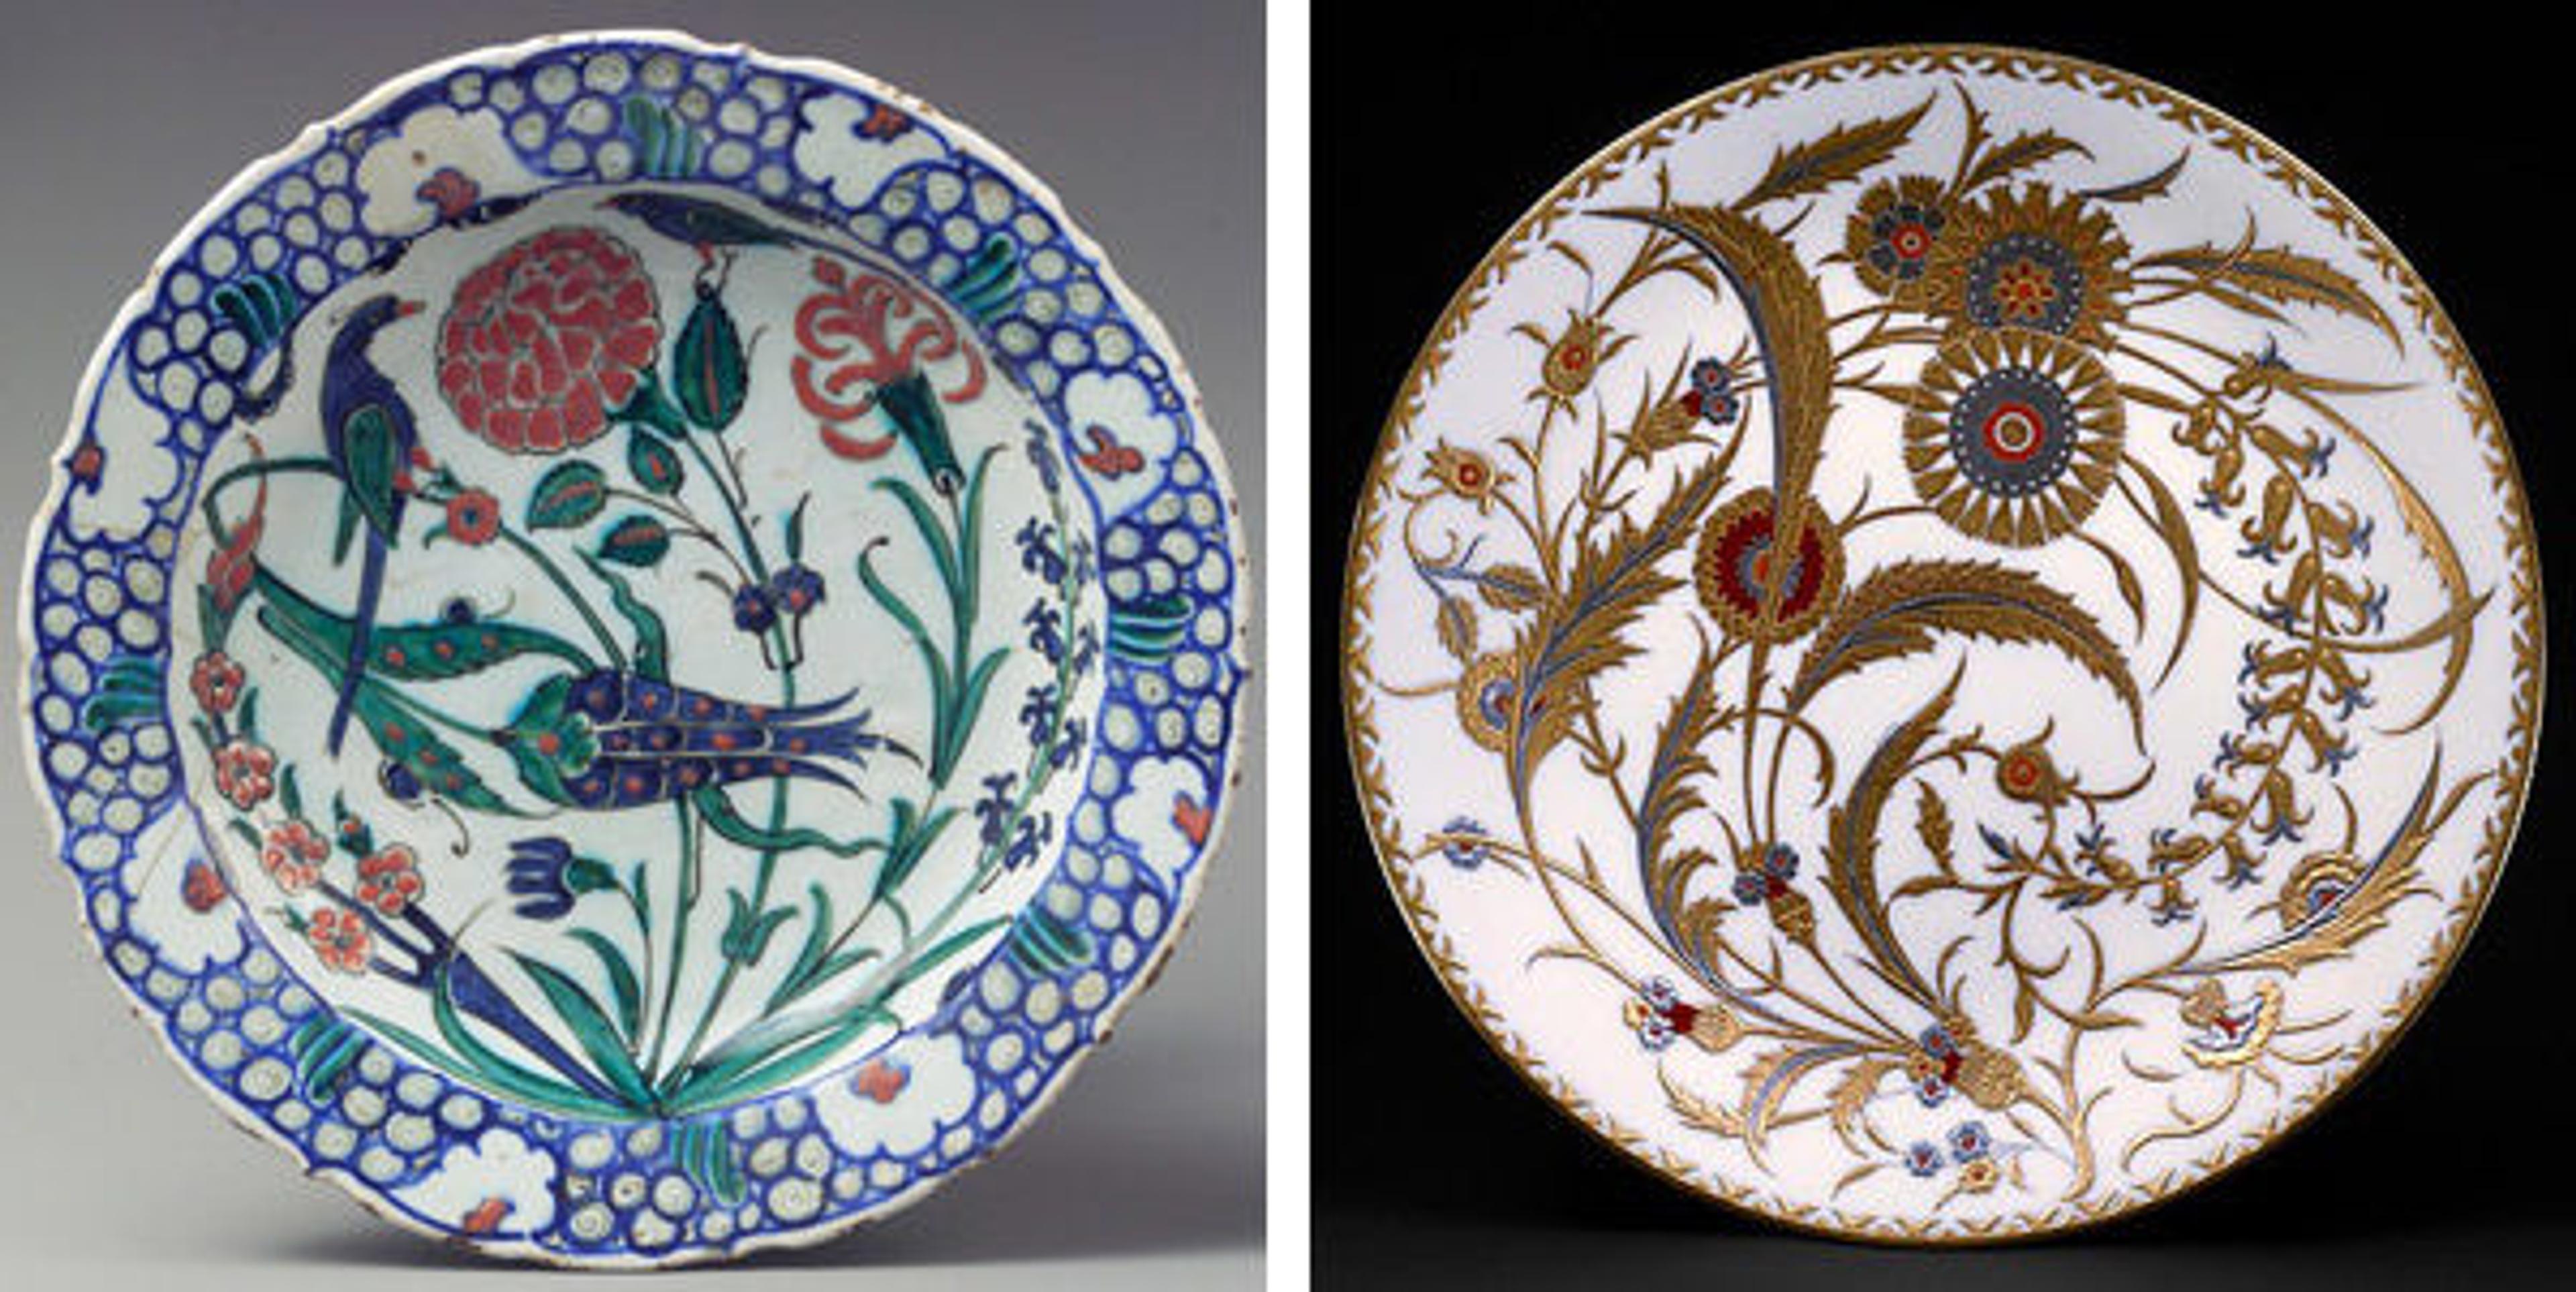 Left: Dish depicting two birds among flowering plants, ca. 1575–90. Turkey, Iznik. Islamic. Stonepaste; polychrome painted under transparent glaze; H. 2 3/8 in., Diam. of rim: 11 3/16 in. (28.4 cm). The Metropolitan Museum of Art, New York, Gift of James J. Rorimer in appreciation of Maurice Dimand's curatorship, 1933–1959, 1959 (59.69.1). Right: Minton(s) (British, Stoke-on-Trent, 1793–present). Plate, 1881. British, Stoke-on-Trent, Staffordshire. Hard-paste porcelain; Diameter: 9 1/2 in. (24.1 cm). The Metropolitan Museum of Art, New York, Gift of Robert L. Isaacson, 1988 (1988.404)